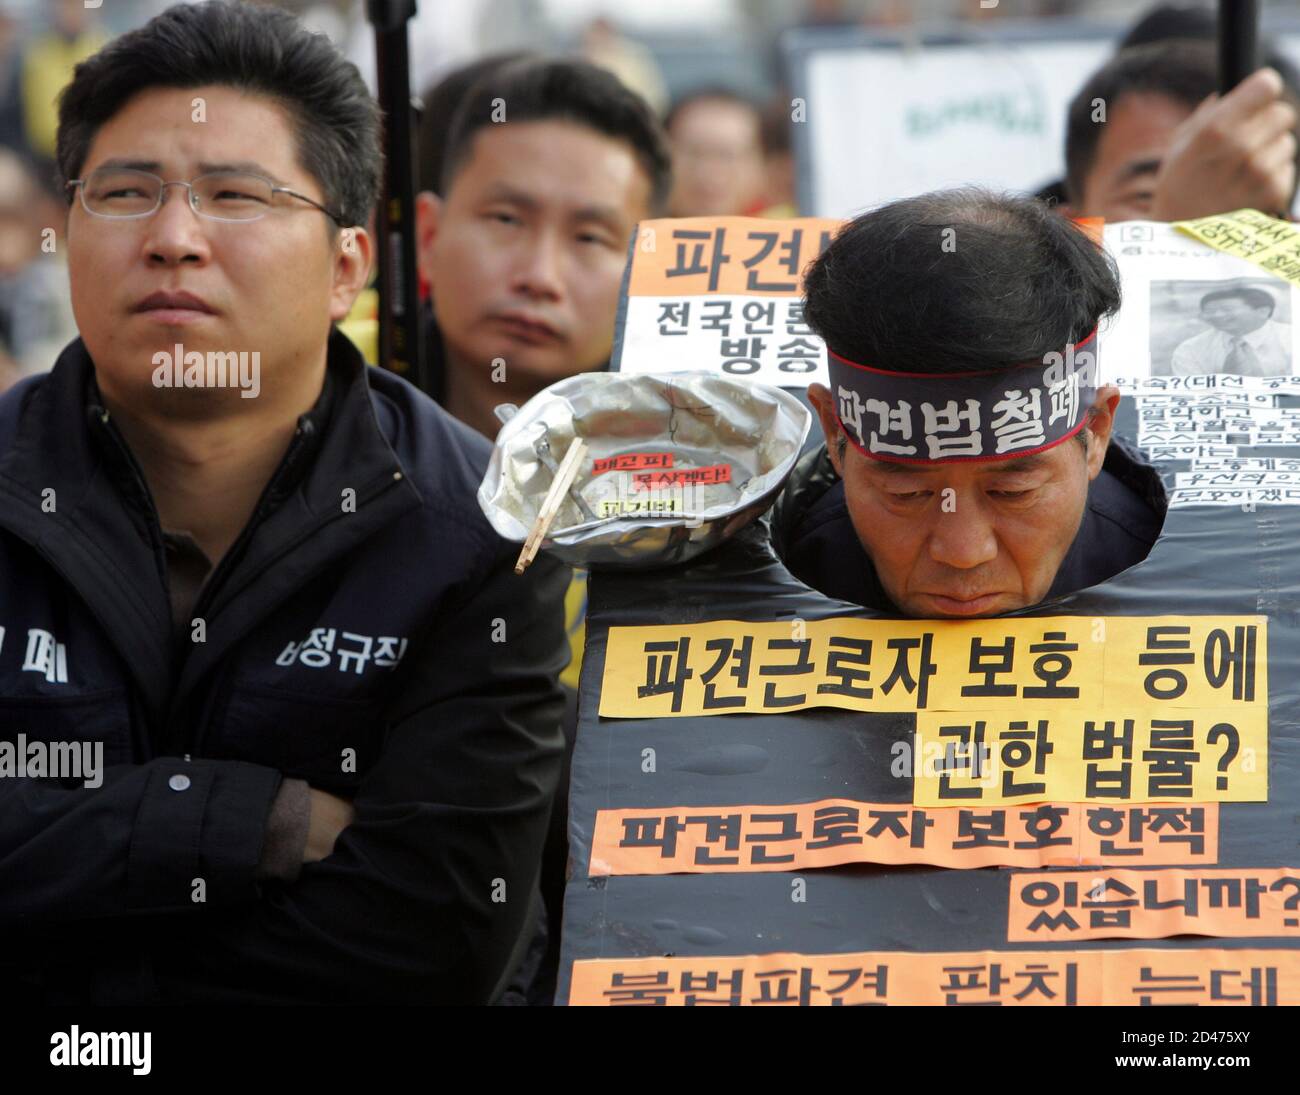 Wearing mock stocks and a bowl with chopsticks and a spoon, a South Korean temporary worker participates in a rally near parliament in Seoul November 24, 2004. About 400 unionised temporary workers rallied in Seoul on Wednesday to oppose a government-driven law, which they insist would worsen their working conditions. REUTERS/You Sung-Ho  YSH/ Stock Photo